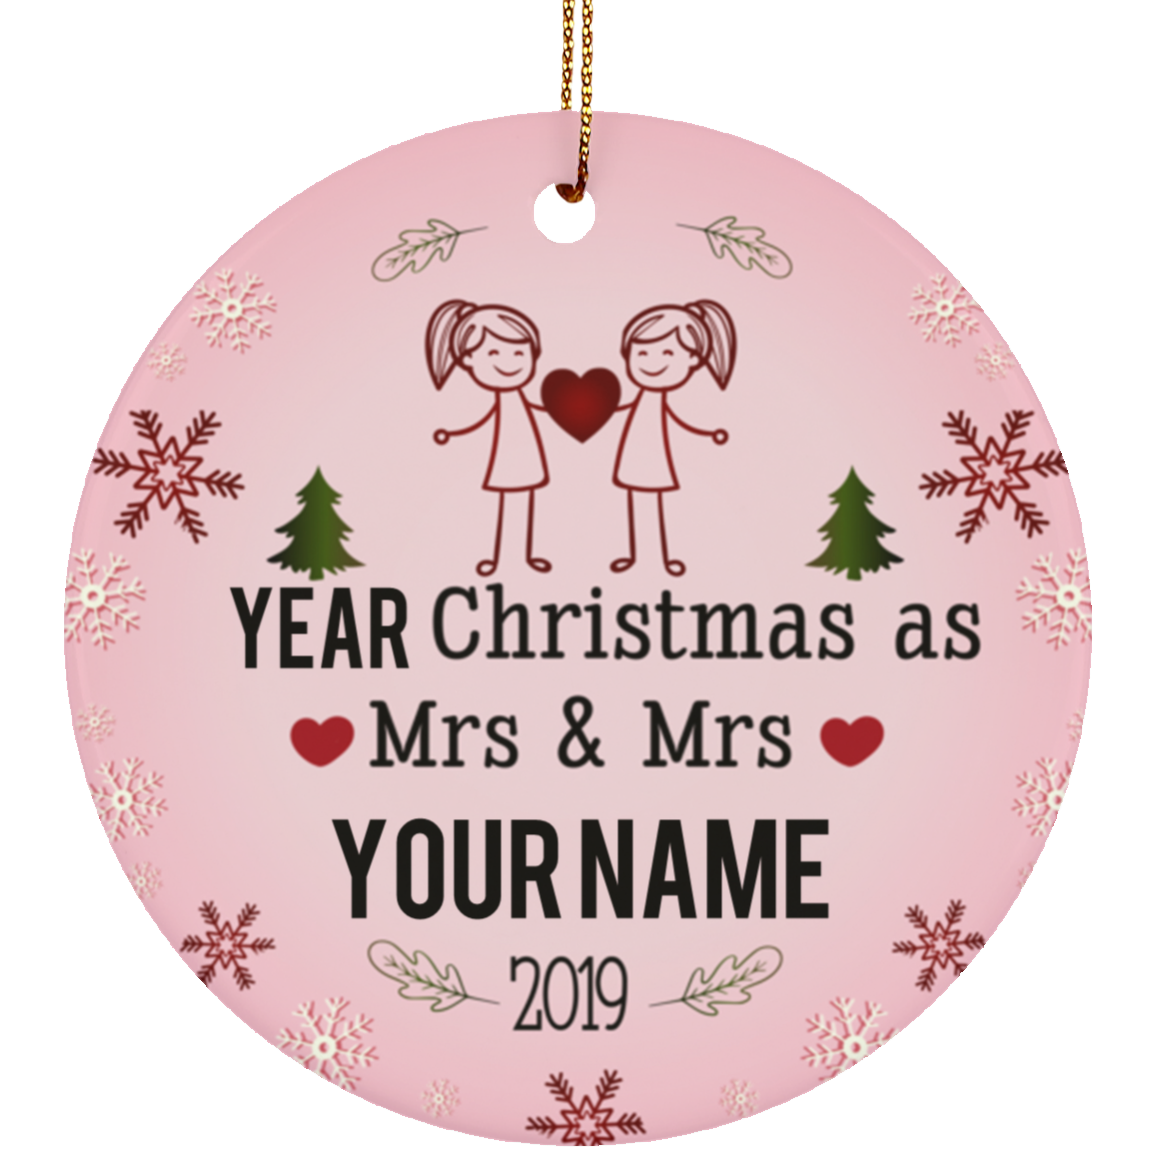 Personalized LGBT Pride Mrs and Mrs Ceramic Circle Christmas Ornament Gift For Lesbian, Gay Couple - Pink Color